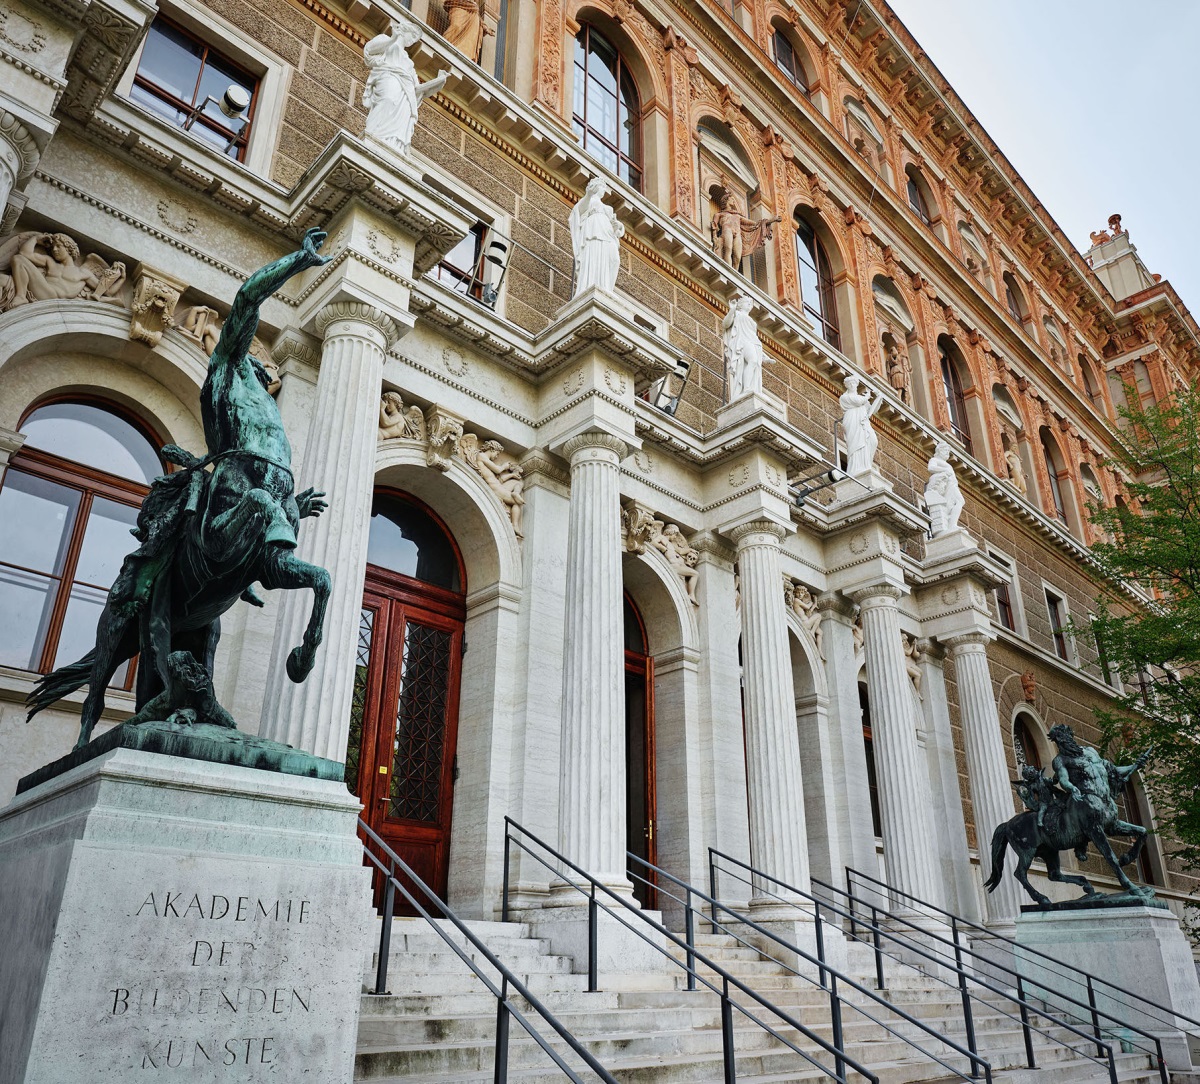 The Academy of Fine Arts Vienna has come under fire for canceling a lecture under baseless charges of anti-Semitism. (photo courtesy Academy of Fine Arts Vienna)